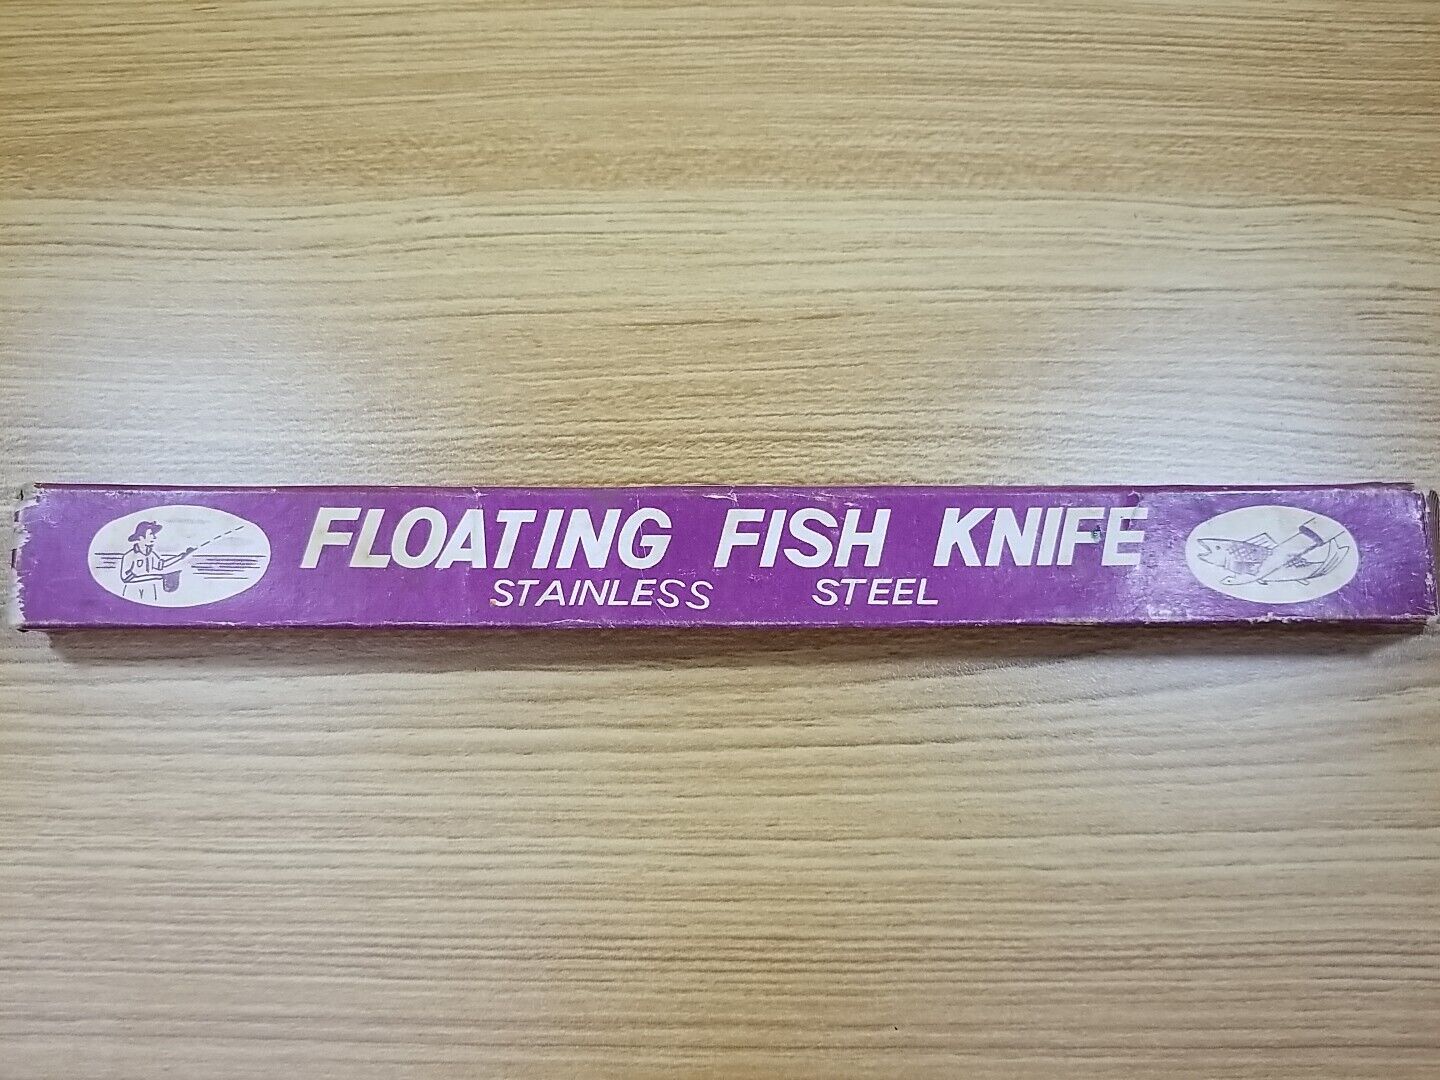 PURITAN CHEMICAL COMPANY Advertising Floating Fish Filet Knife  Made in Japan